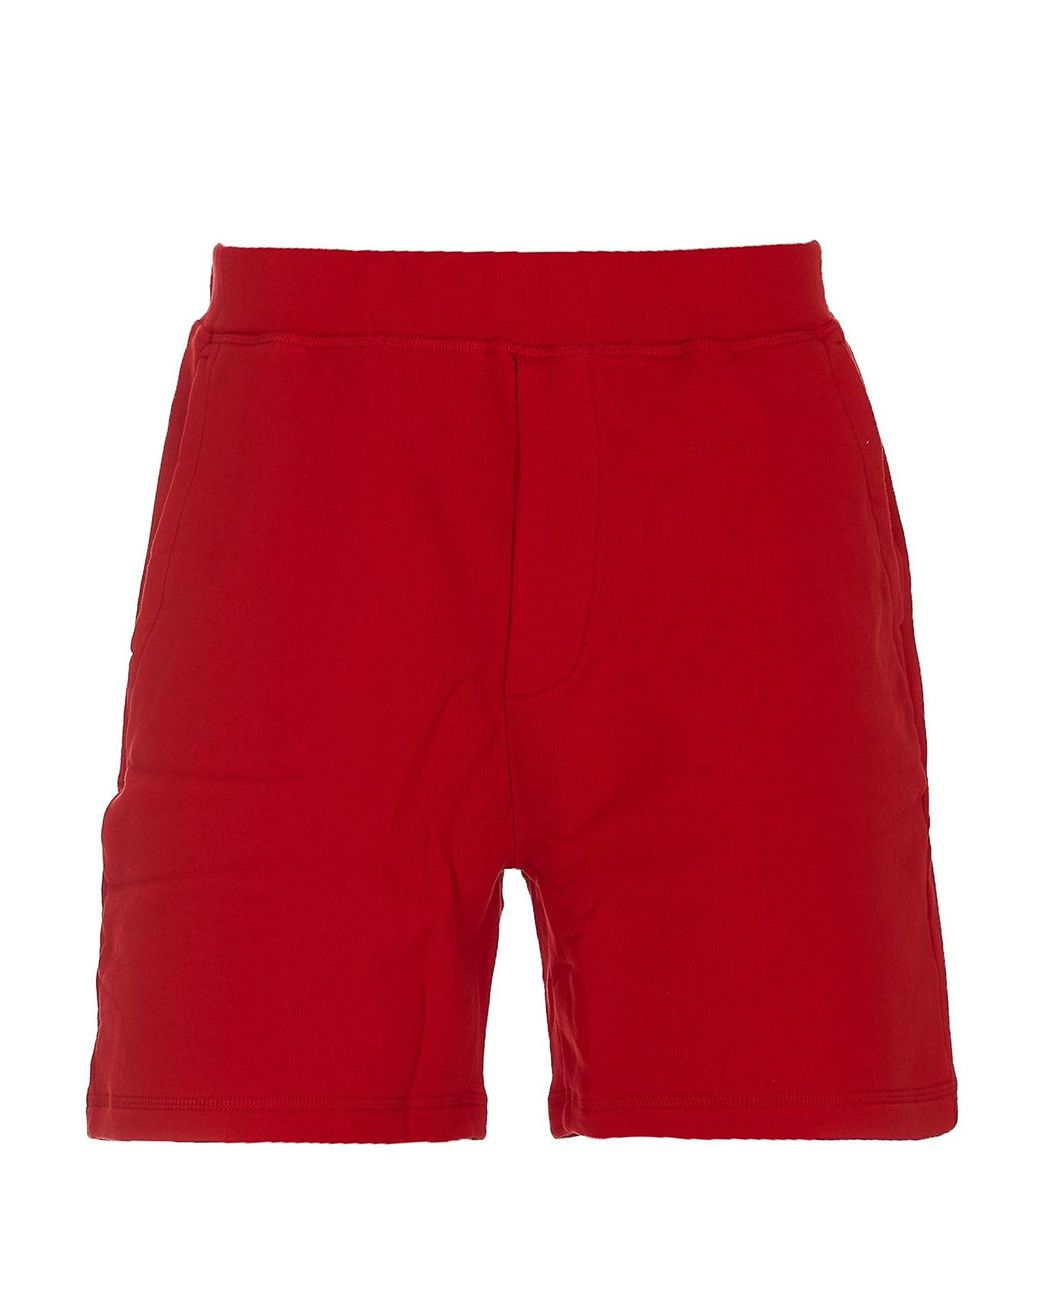 DSquared² Cotton Shorts in Red for Men - Lyst